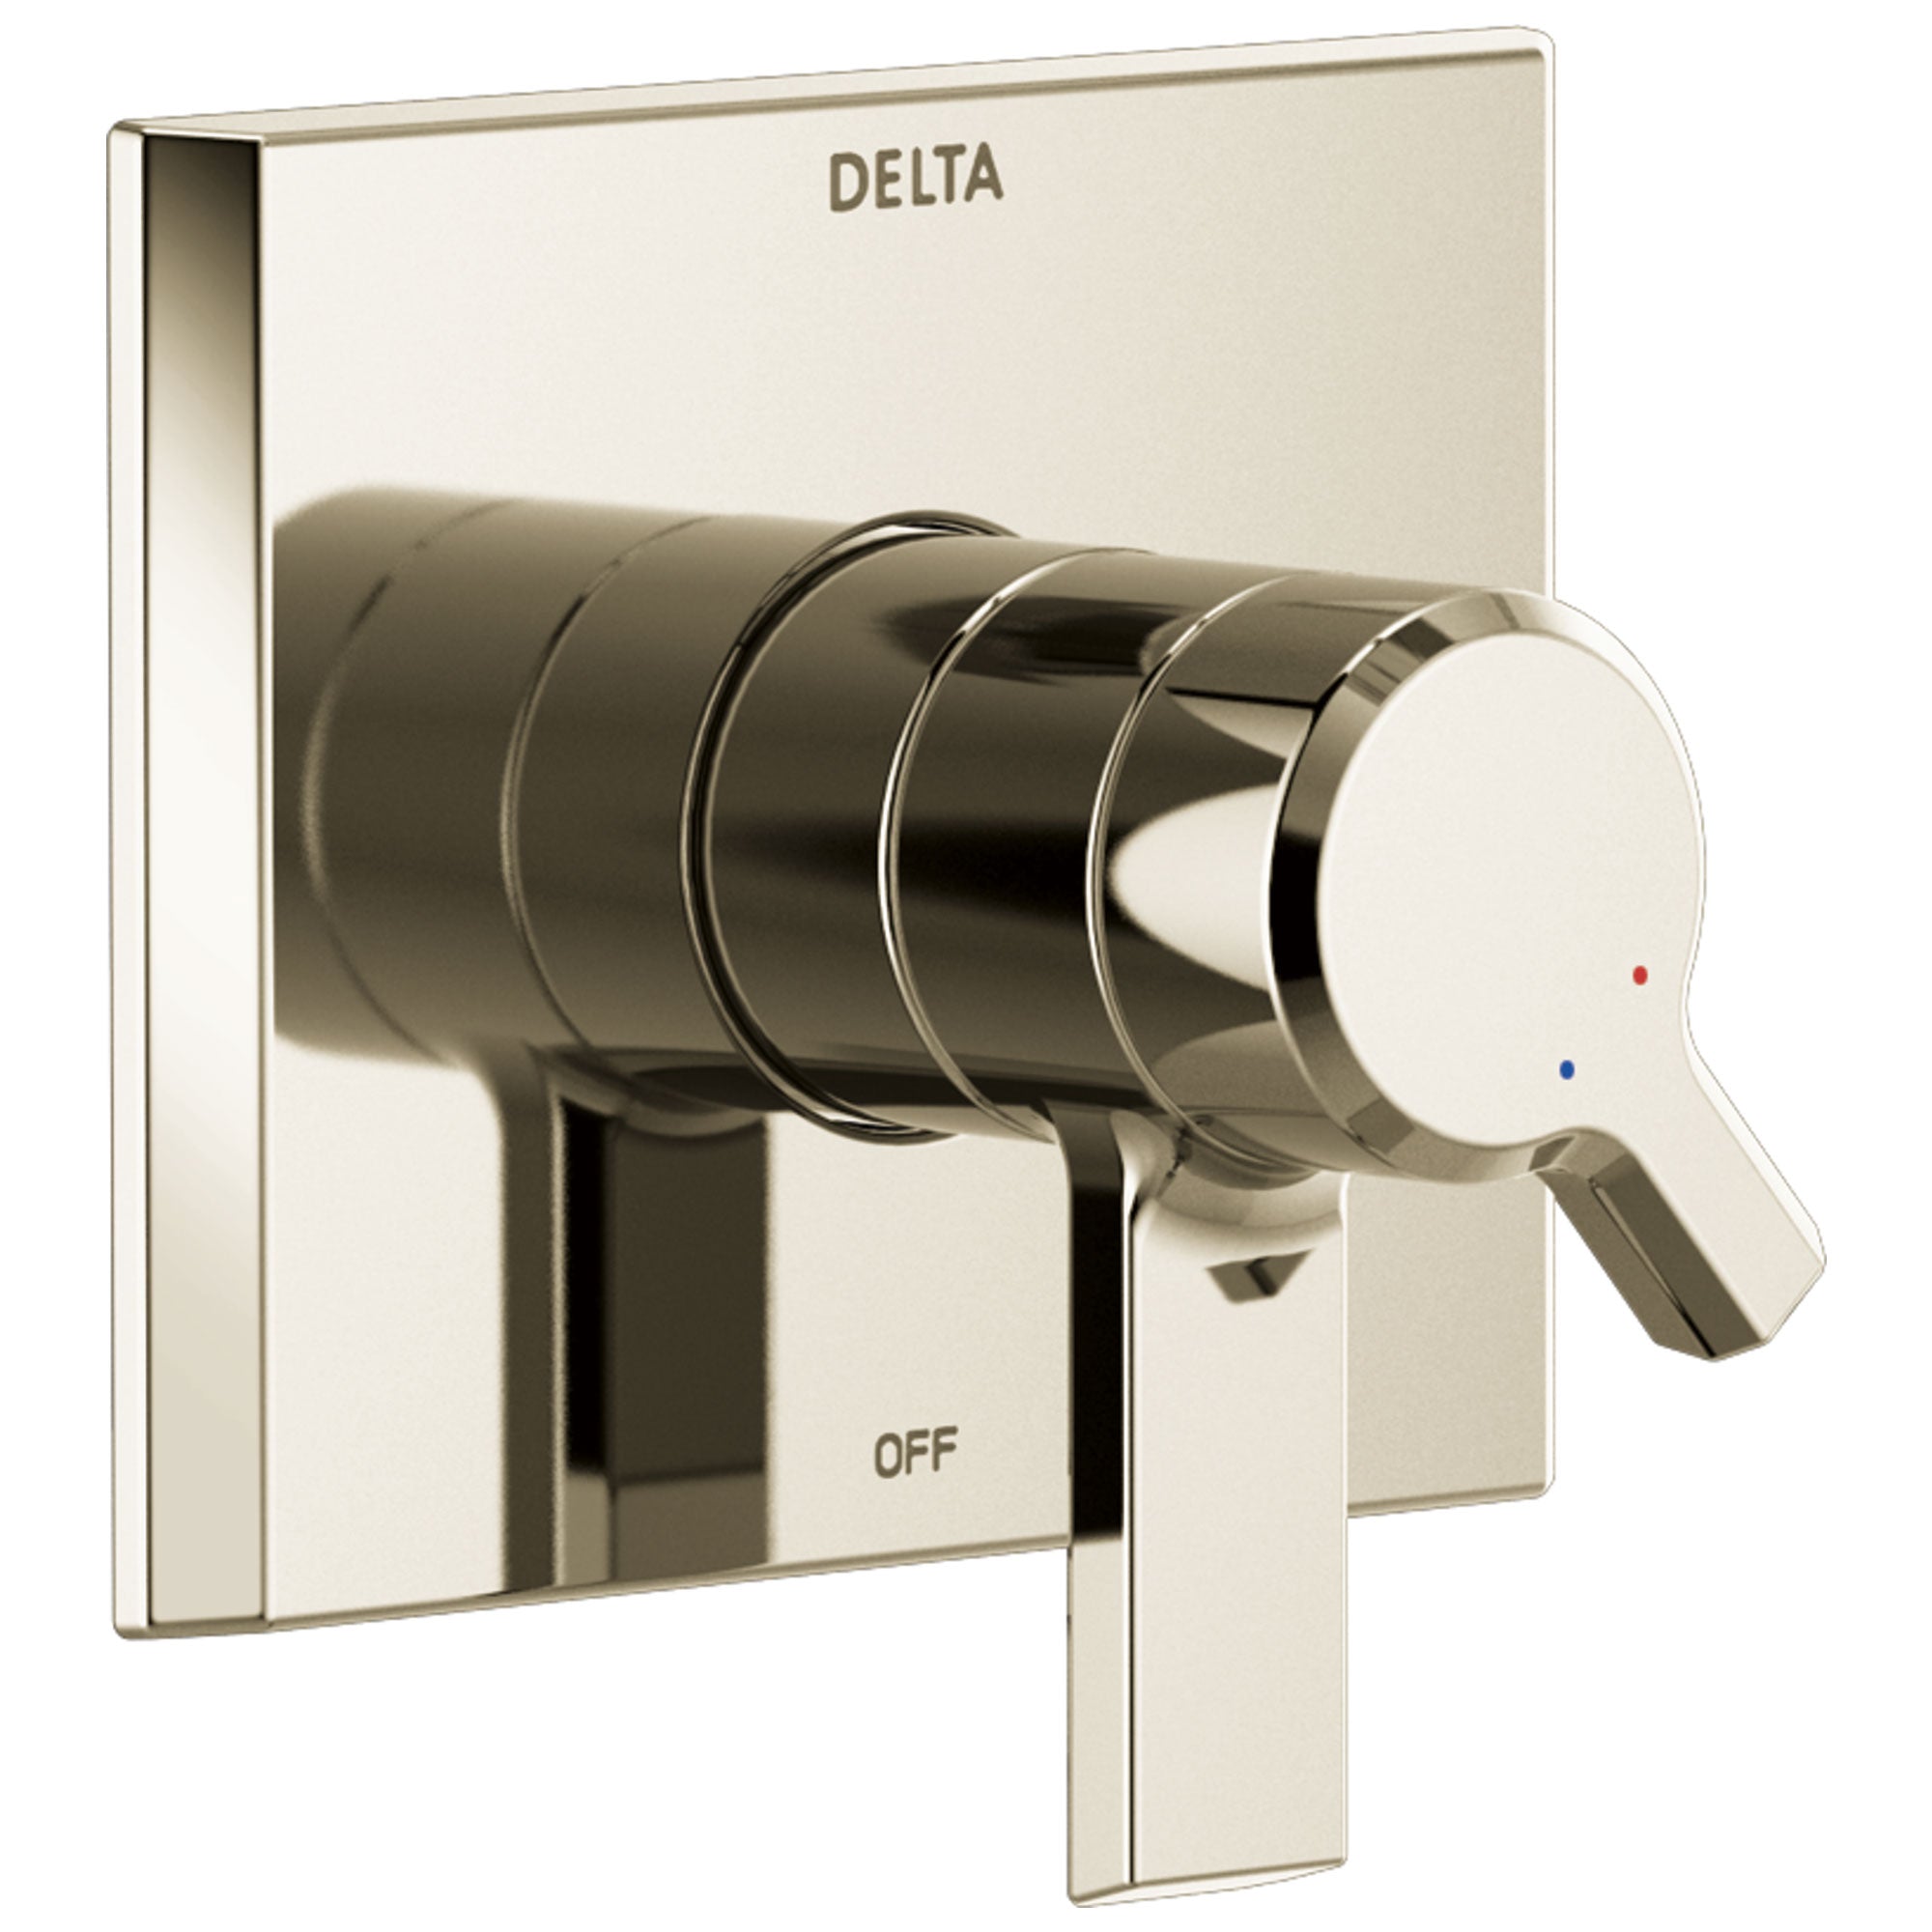 Delta Pivotal Modern Polished Nickel Finish Monitor 17 Series Shower Faucet Control Includes Handles, Cartridge, and Valve with Stops D3394V